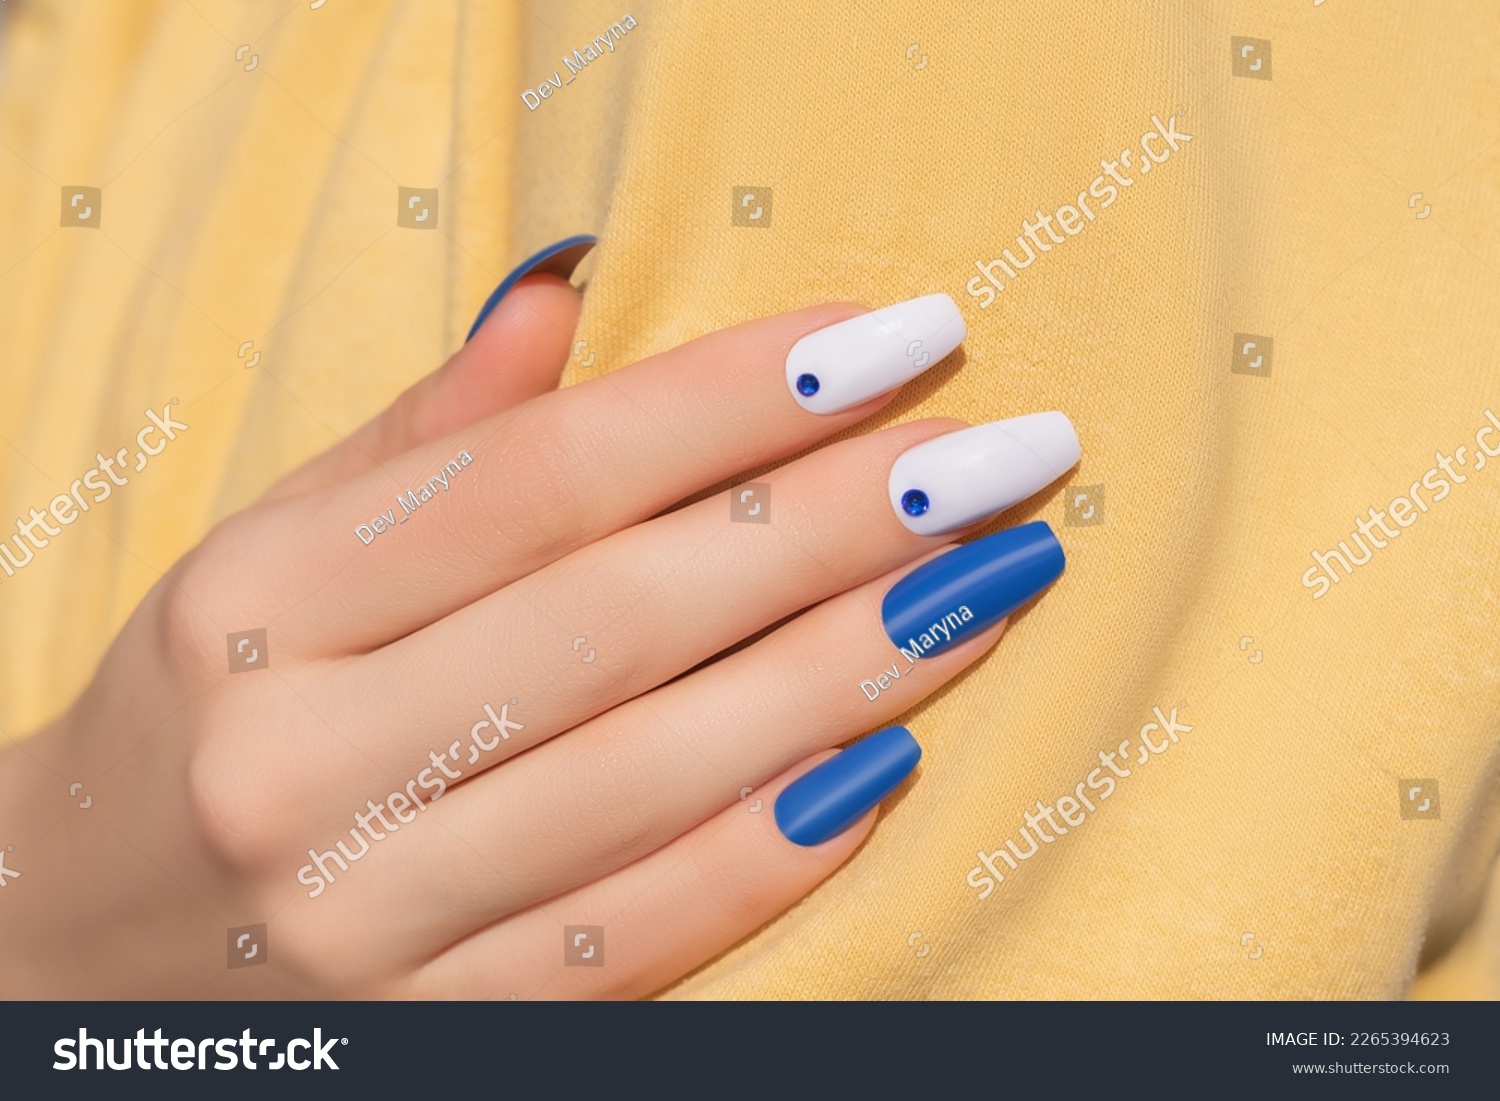 Female hand with rhinestones nail design. Glitter white and blue nail polish manicure with rhinestones nail art. Female model hand with perfect manicure and nail art on yellow fabric background. #2265394623